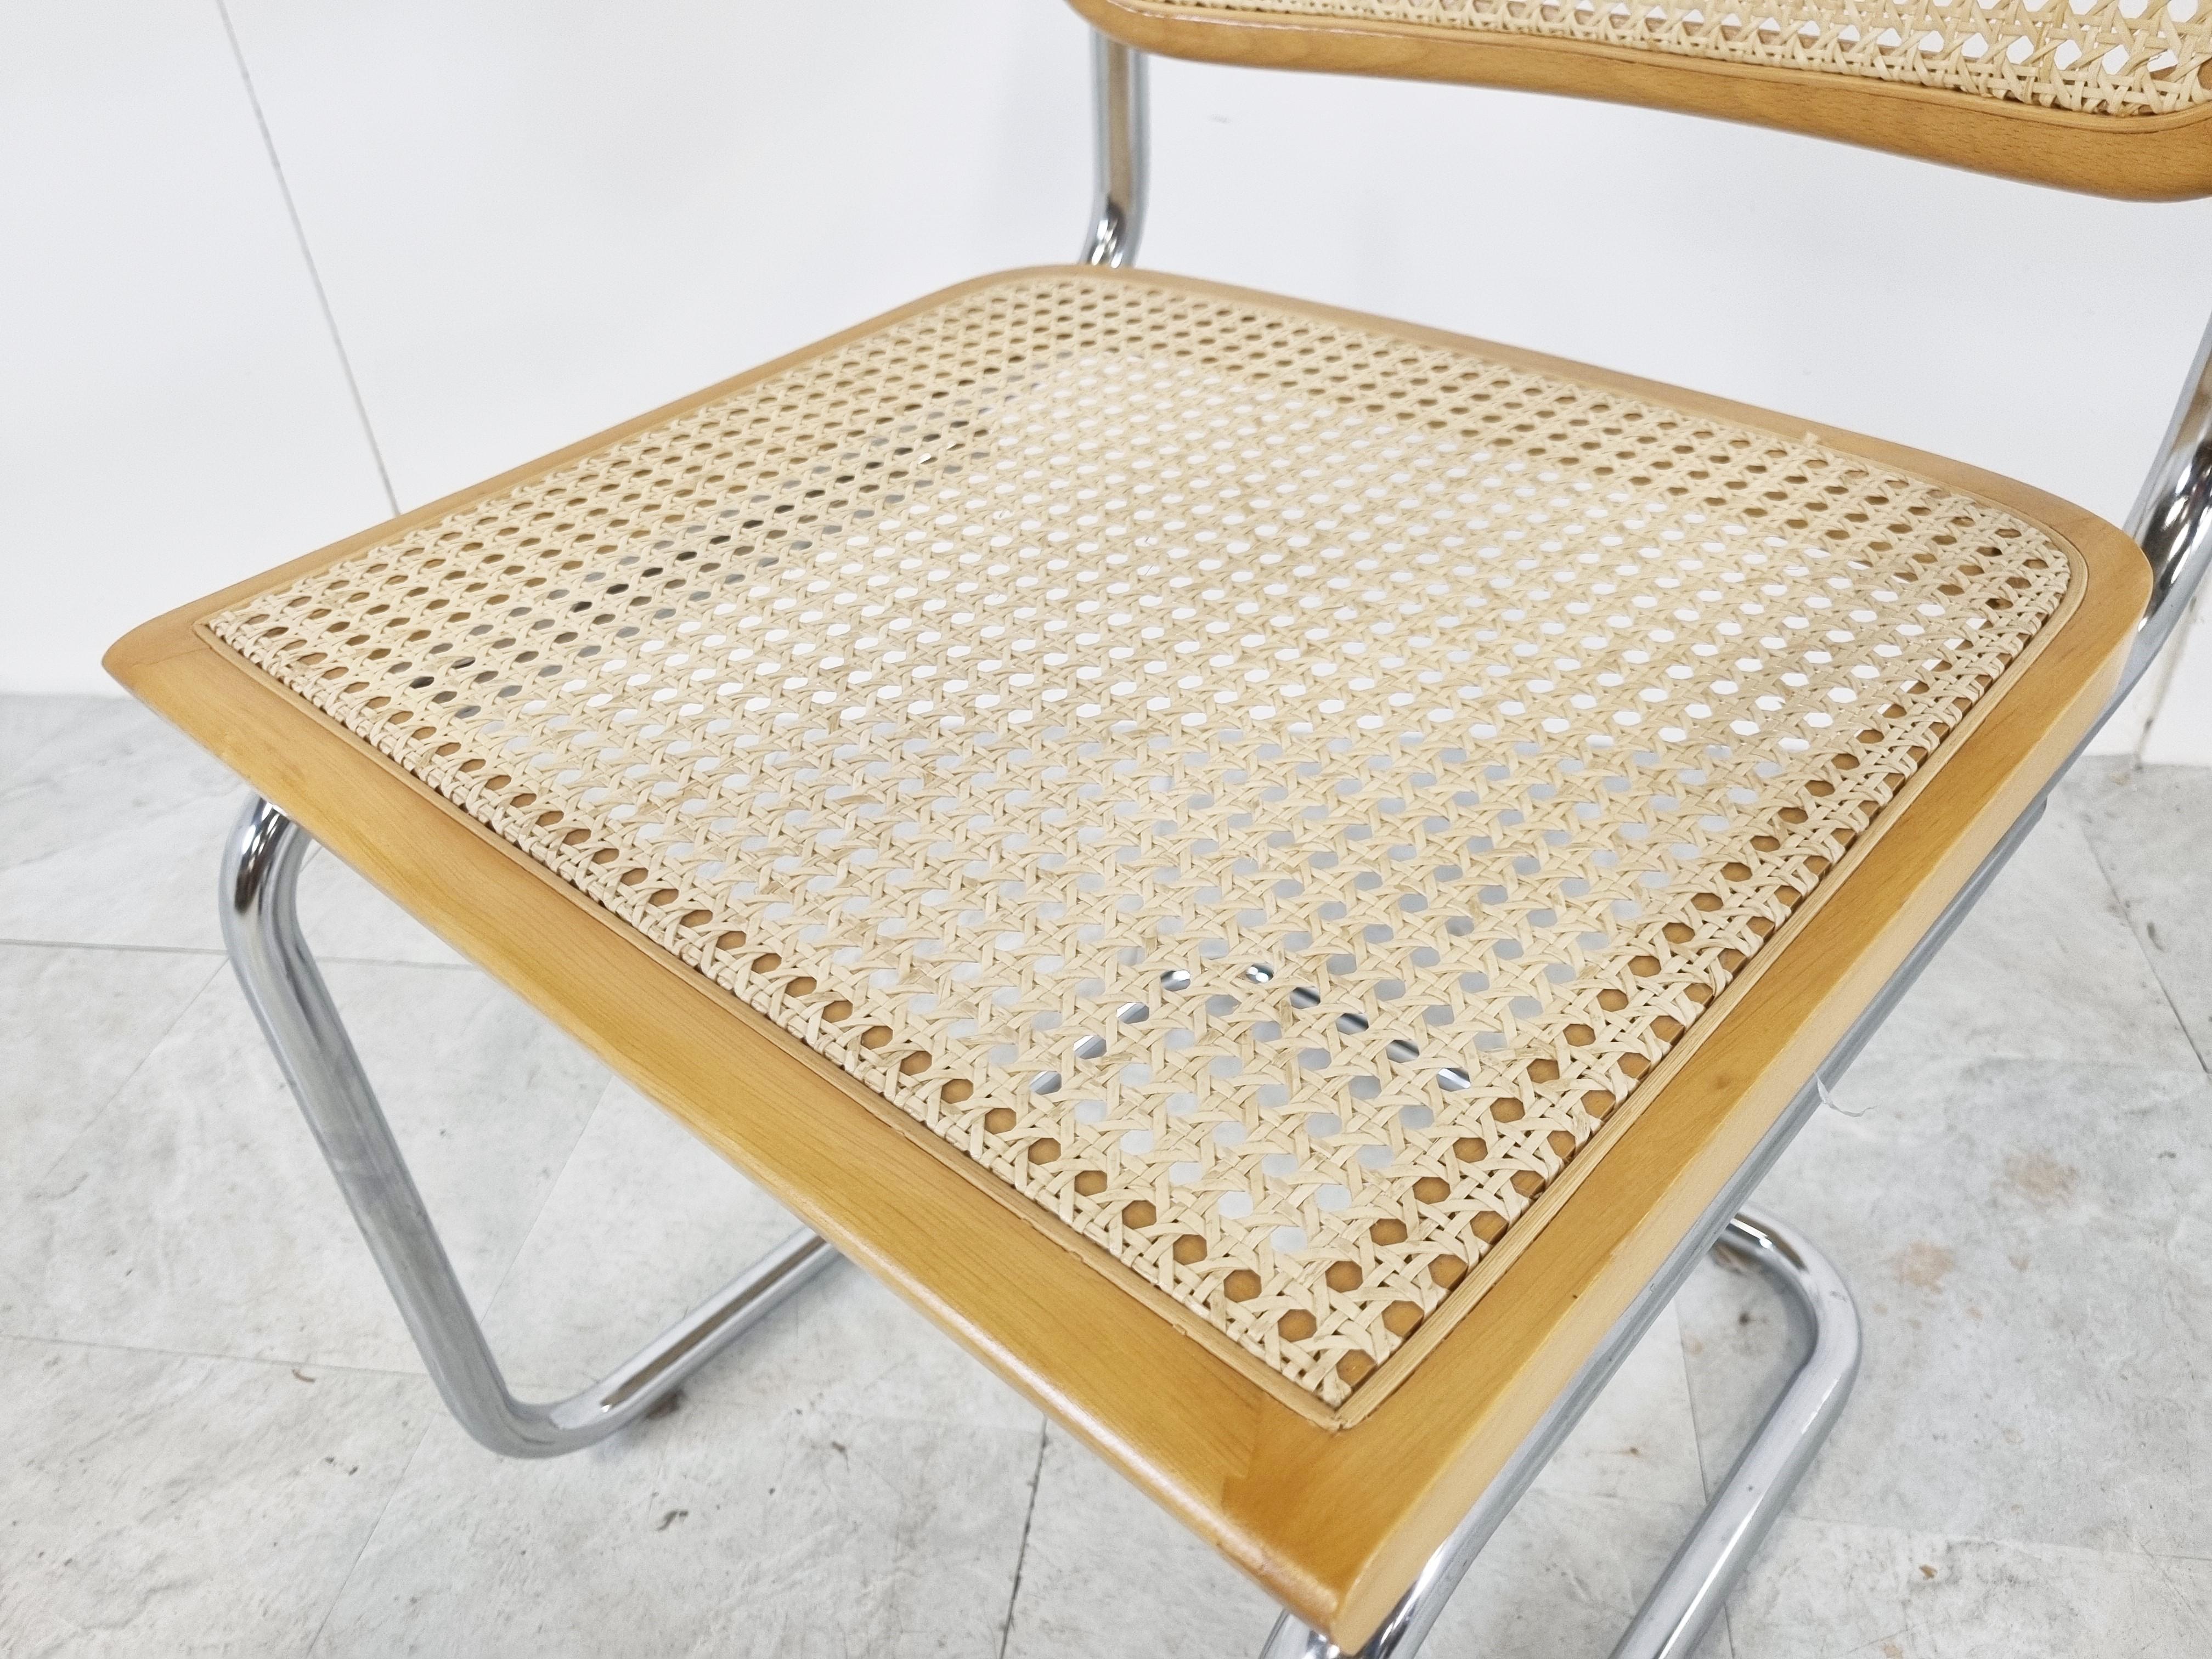 Beautiful bauhaus style 'cesca' armchairs, original design by Marcel breuer.

Timeless cantilever design with beech wooden and woven rattan seat and backrest and chromed tubular steel frame.

Great as dining chair or desk chair.

These where